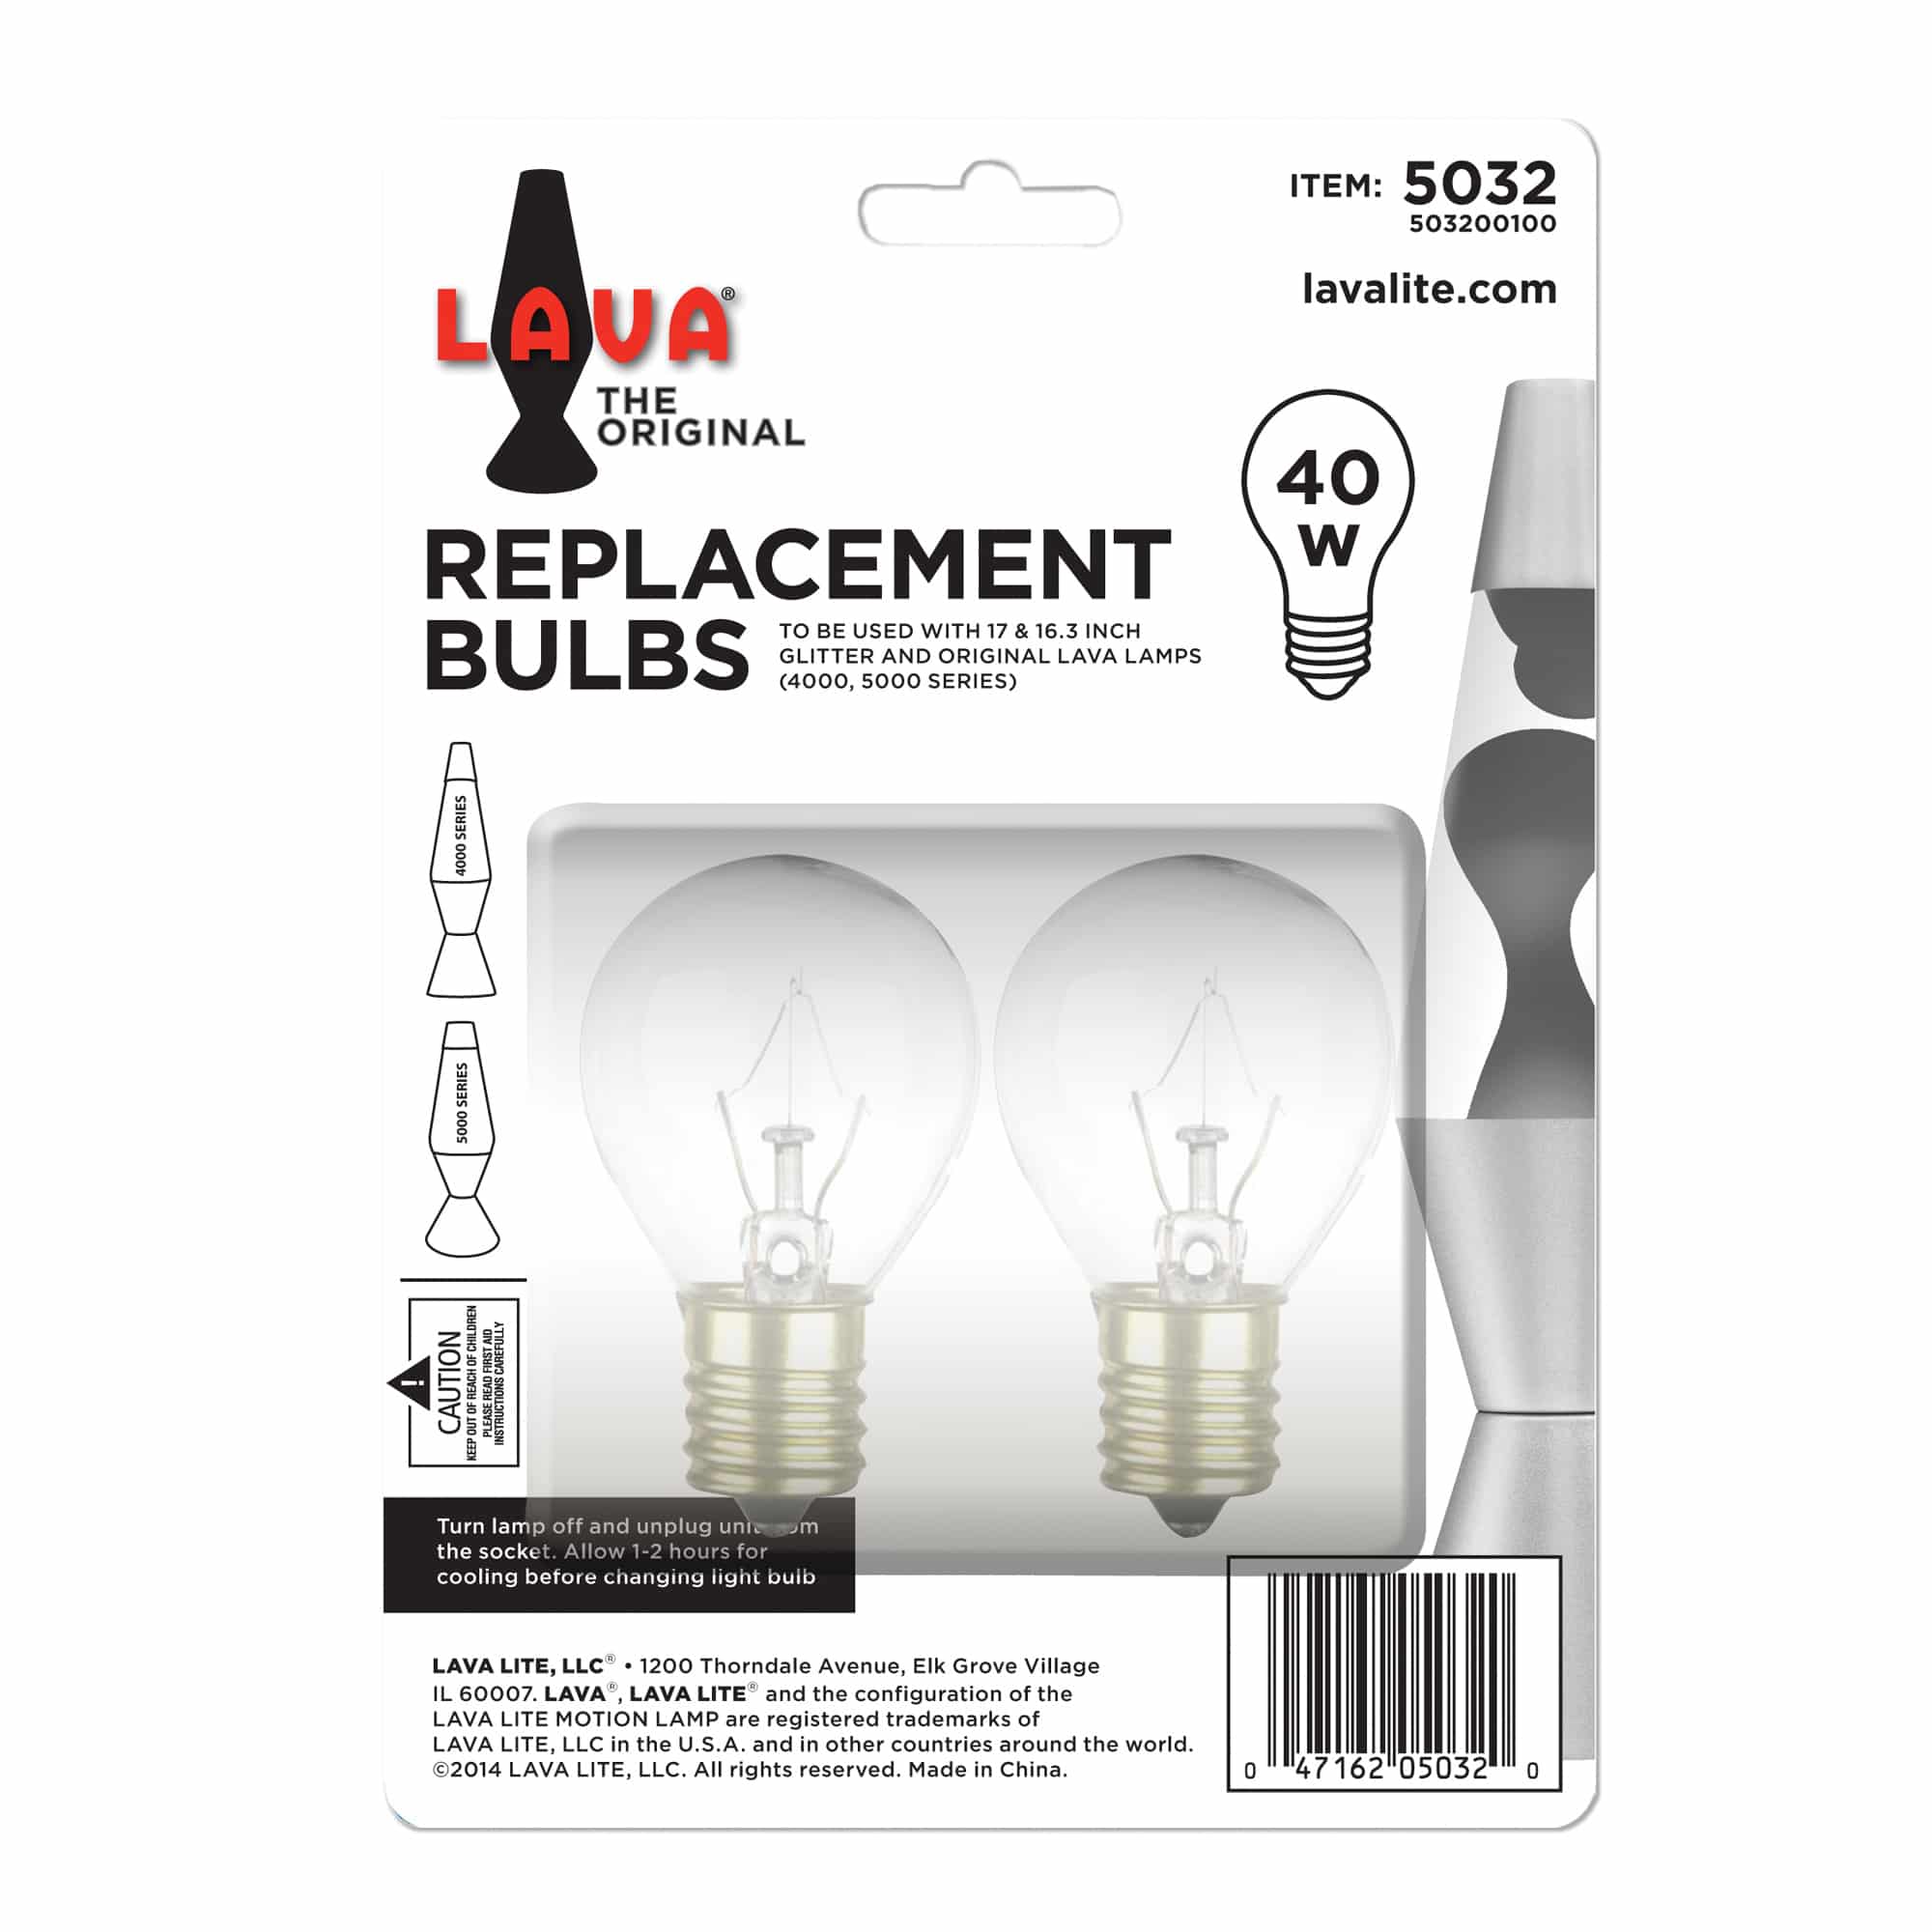 Lava Lamp Replacement Bulb 40W for 16.3" and 17" Lamps    